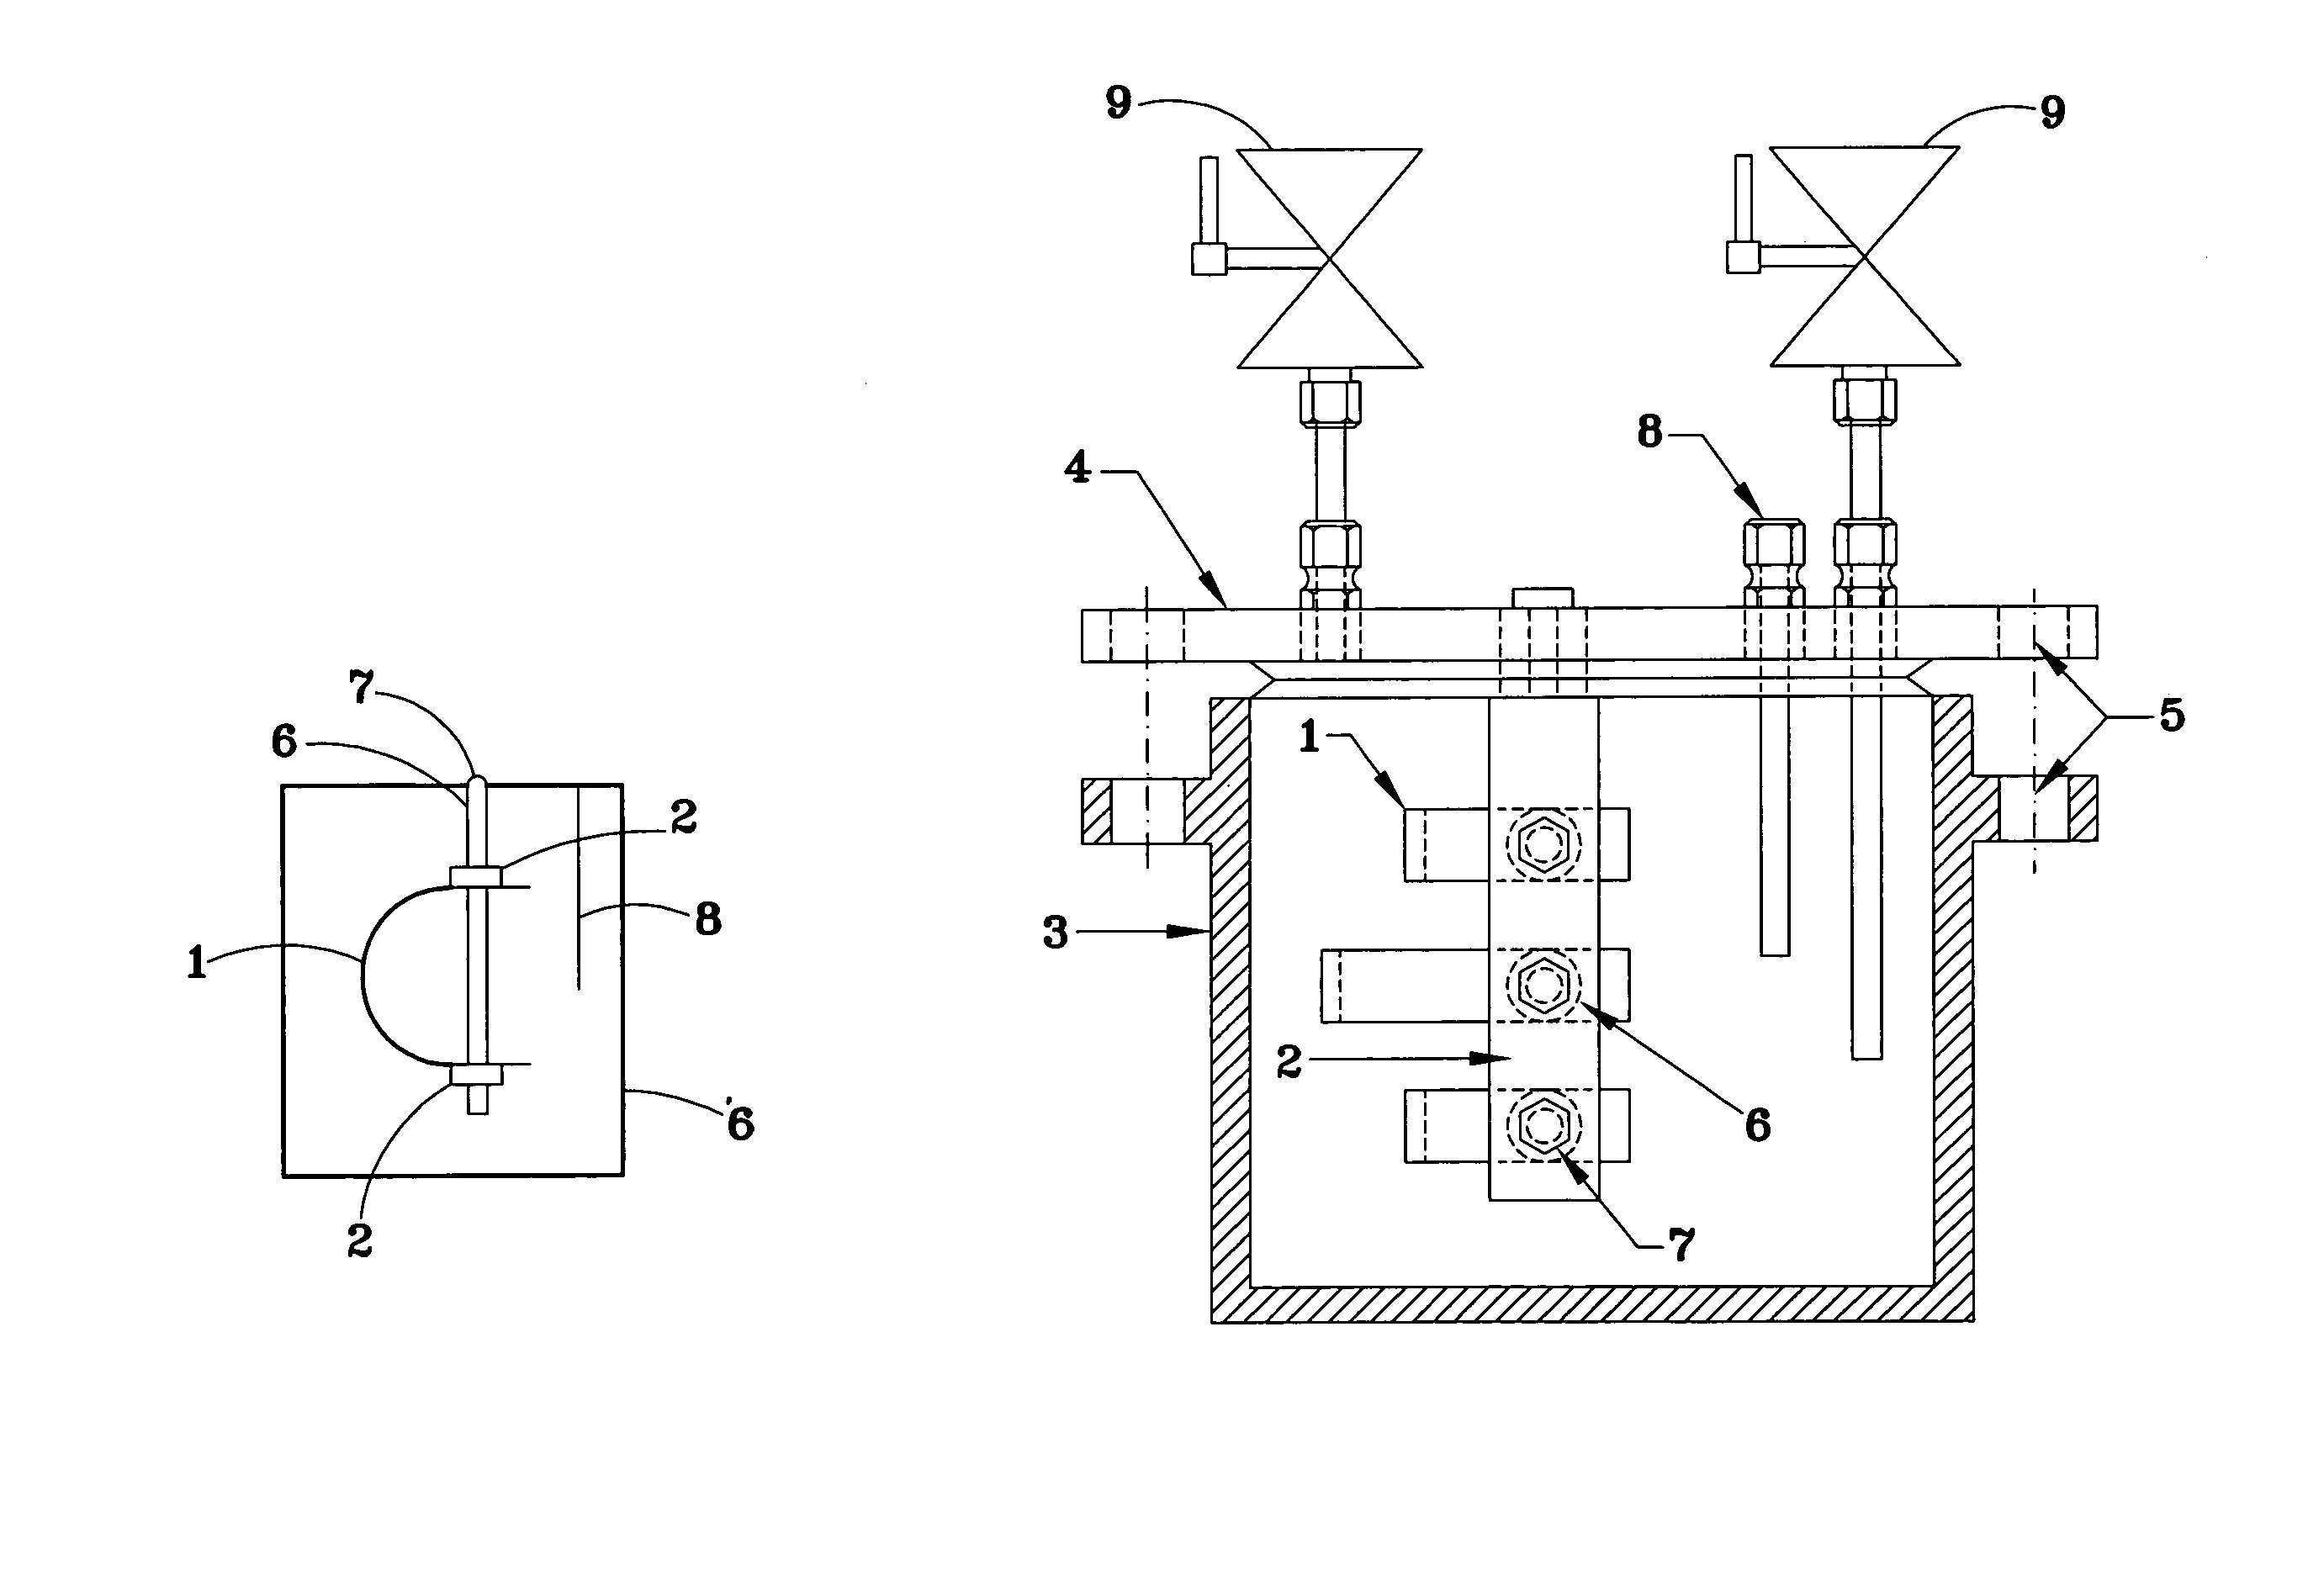 Method for monitoring corrosion damage to a metal sample